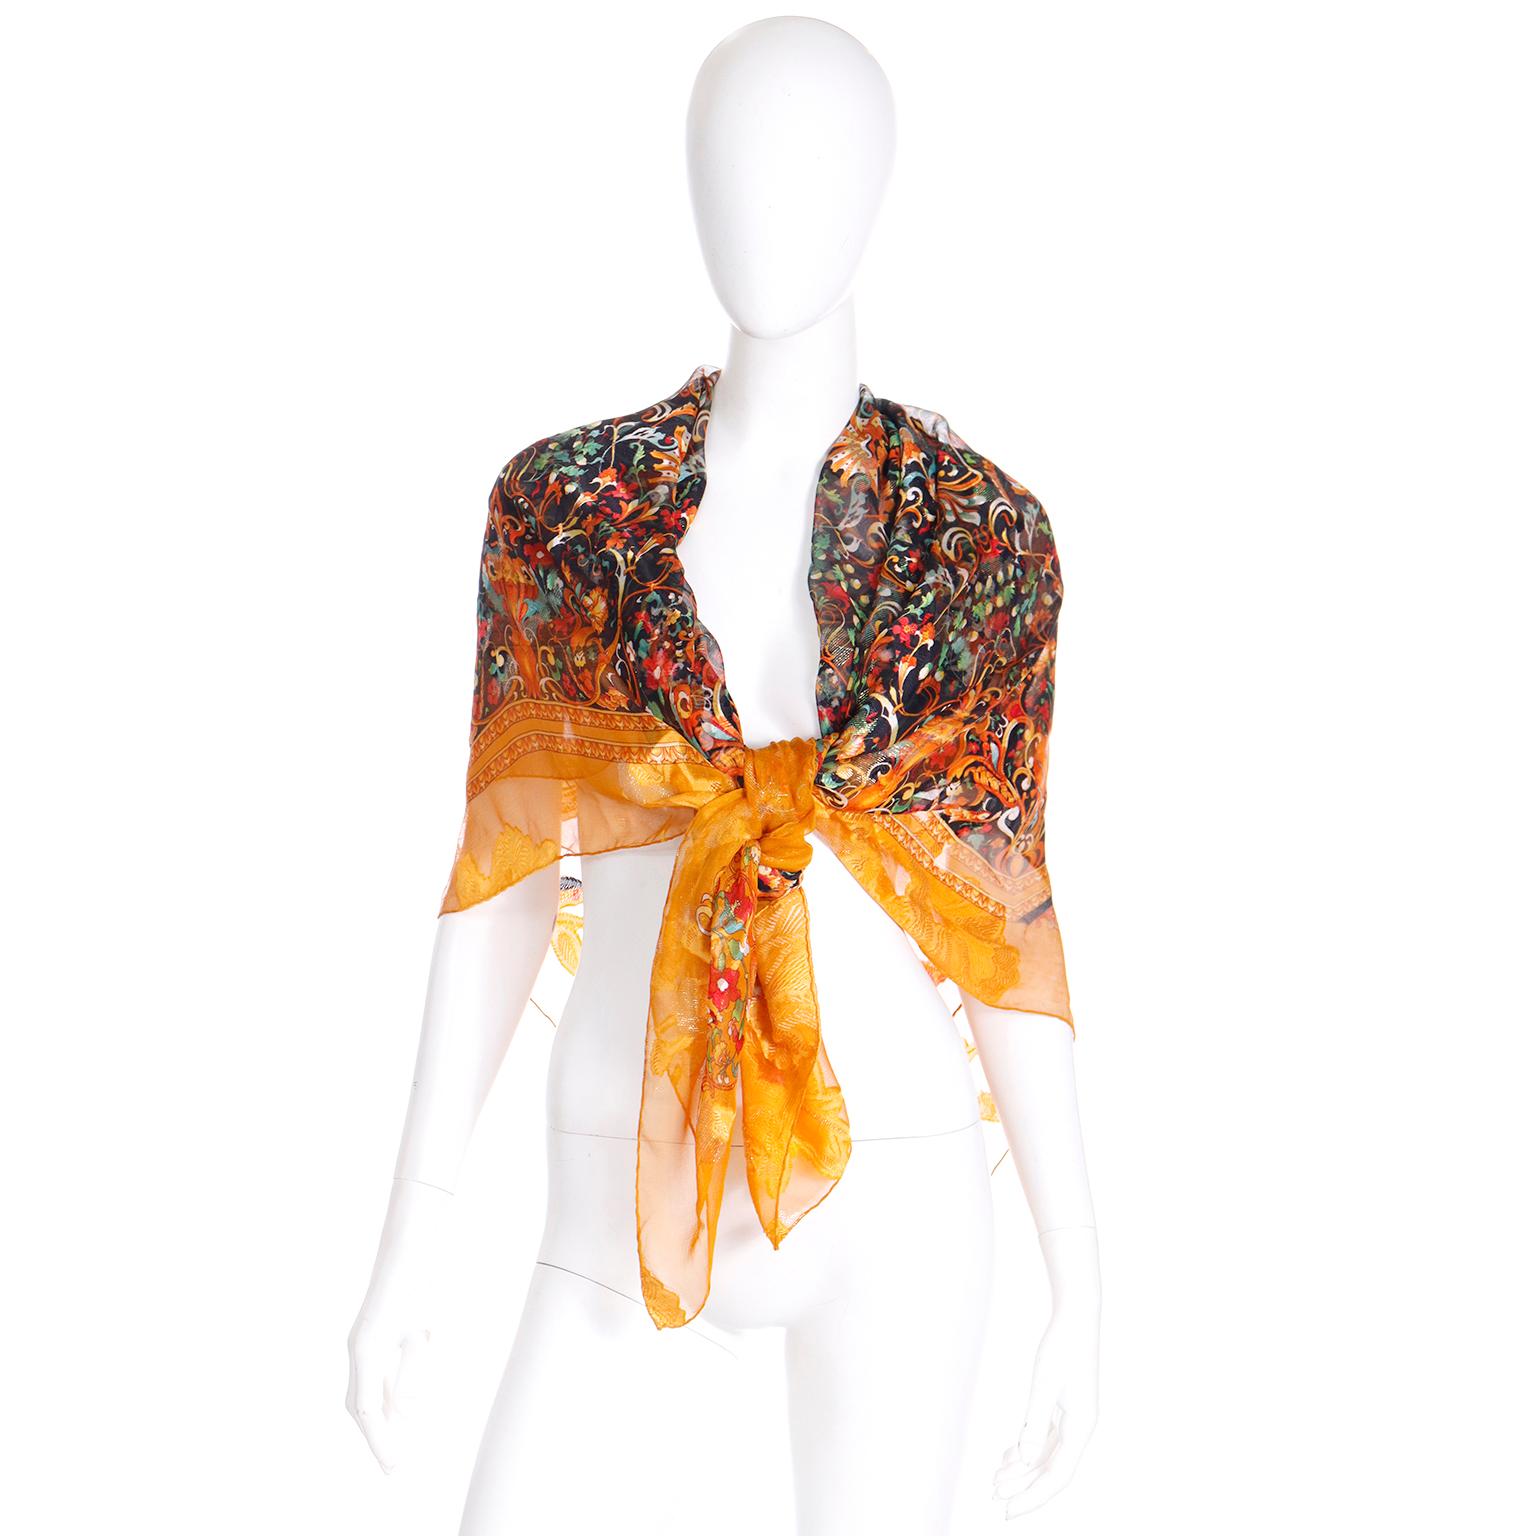 This is an elegant vintage silk scarf from Gianfranco Ferre. The beautiful luxe print is in rich shades of tangerine orange green, red, yellow, white, and black. The ultra fine gold lame yarns add a luxurious shimmer to the scarf and we love the